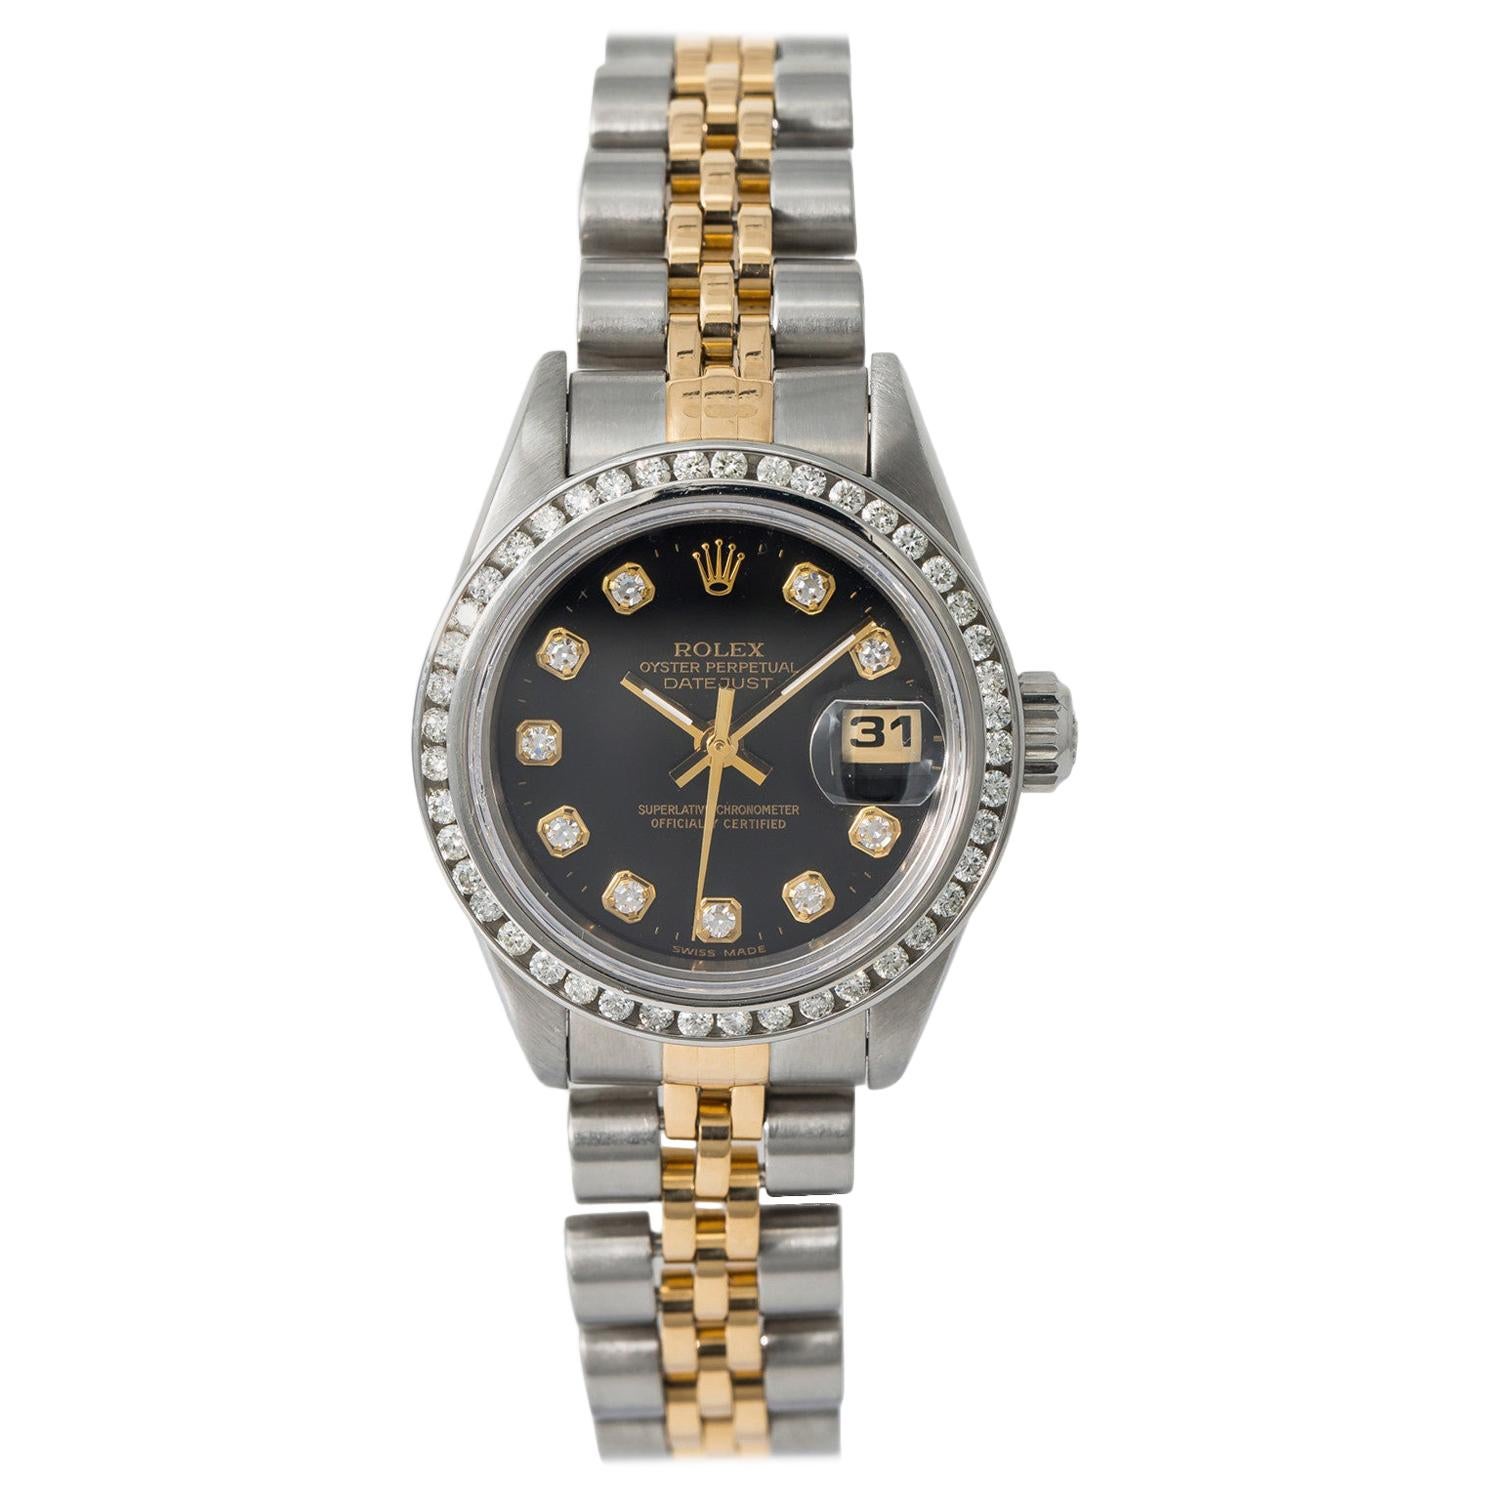 Rolex Datejust 69173, Black Dial, Certified and Warranty